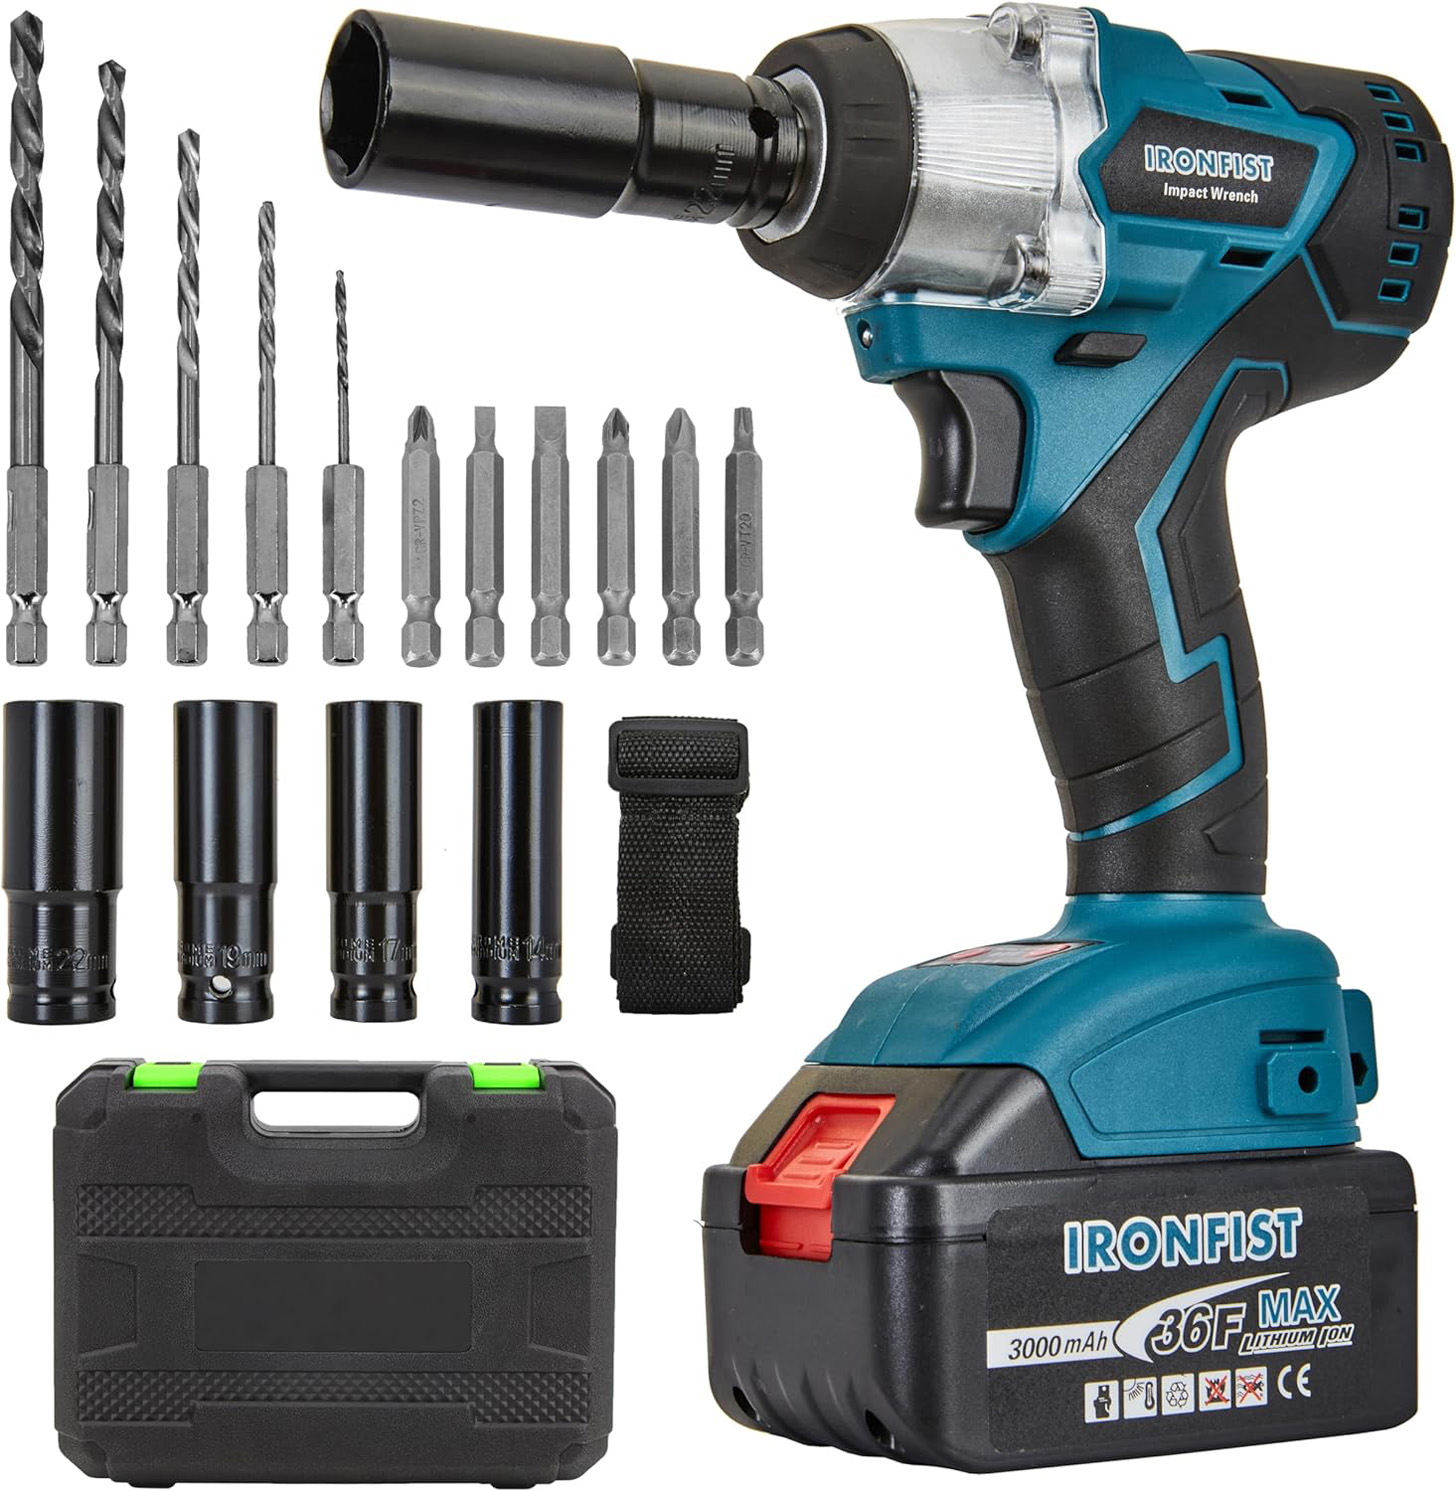 IRONFIST Cordless Impact Wrench, Electric Power Impact Screwdriver with 21V Lithium Battery Brushless Motor with 420Nm Torque